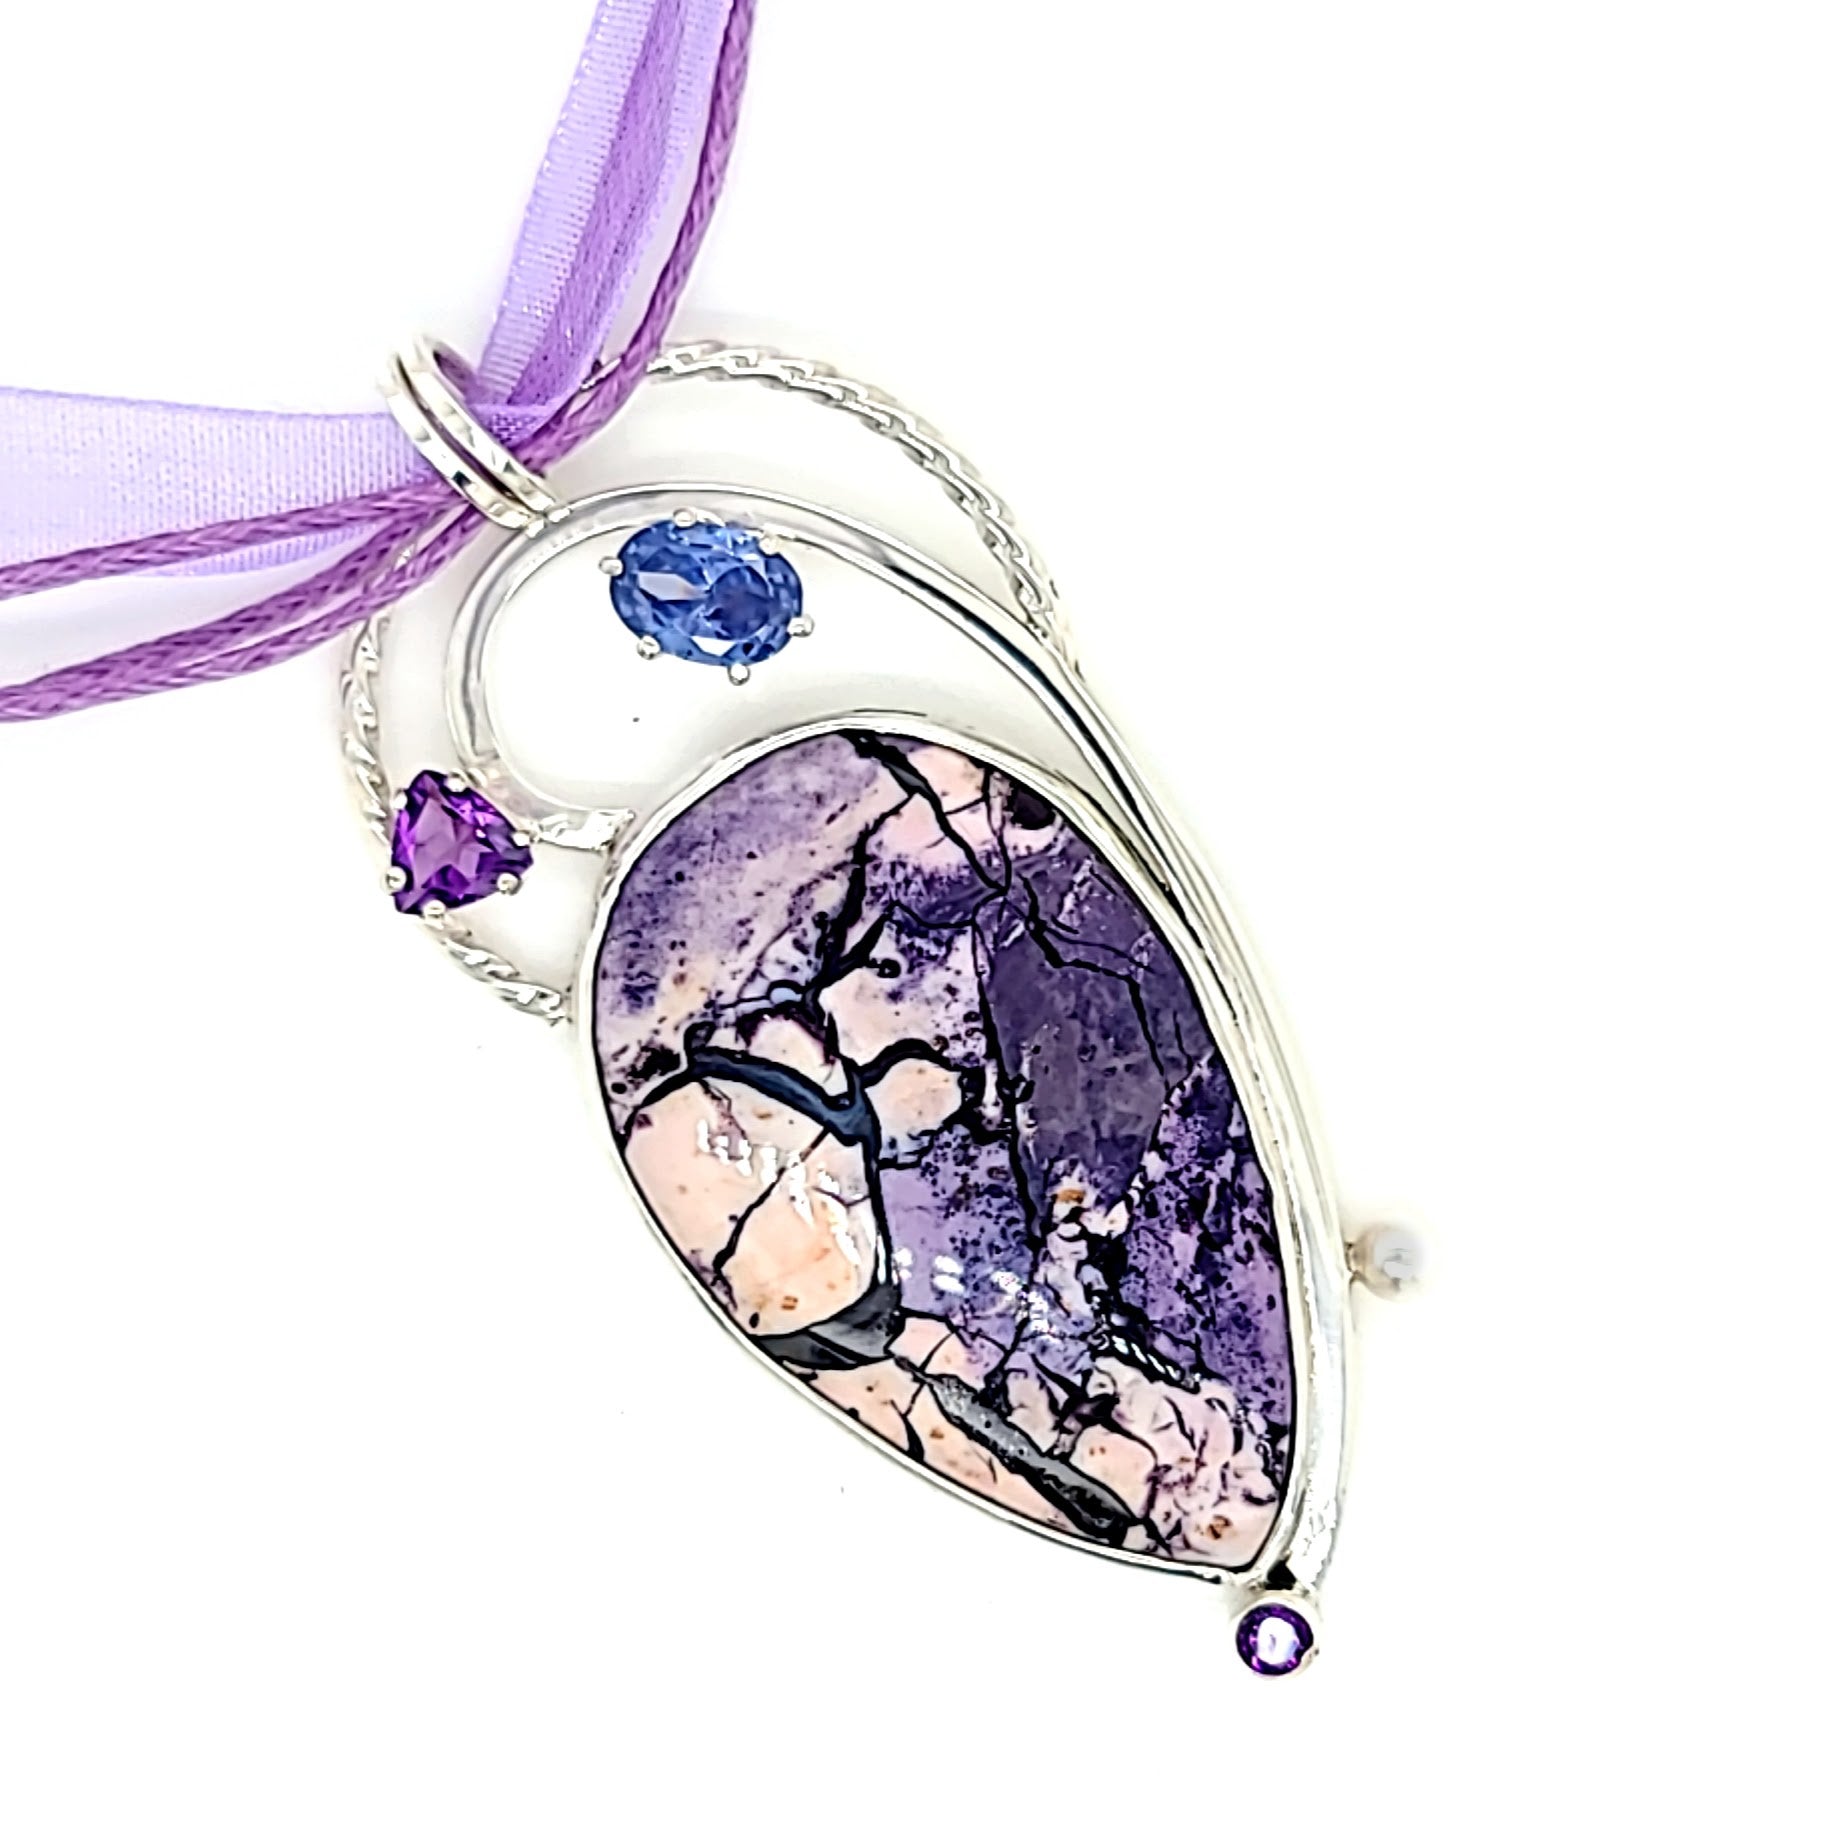 Tiffany Stone, Amethyst, Lab Tanzanite and Freshwater Pearl Pendant set in Sterling Silver.